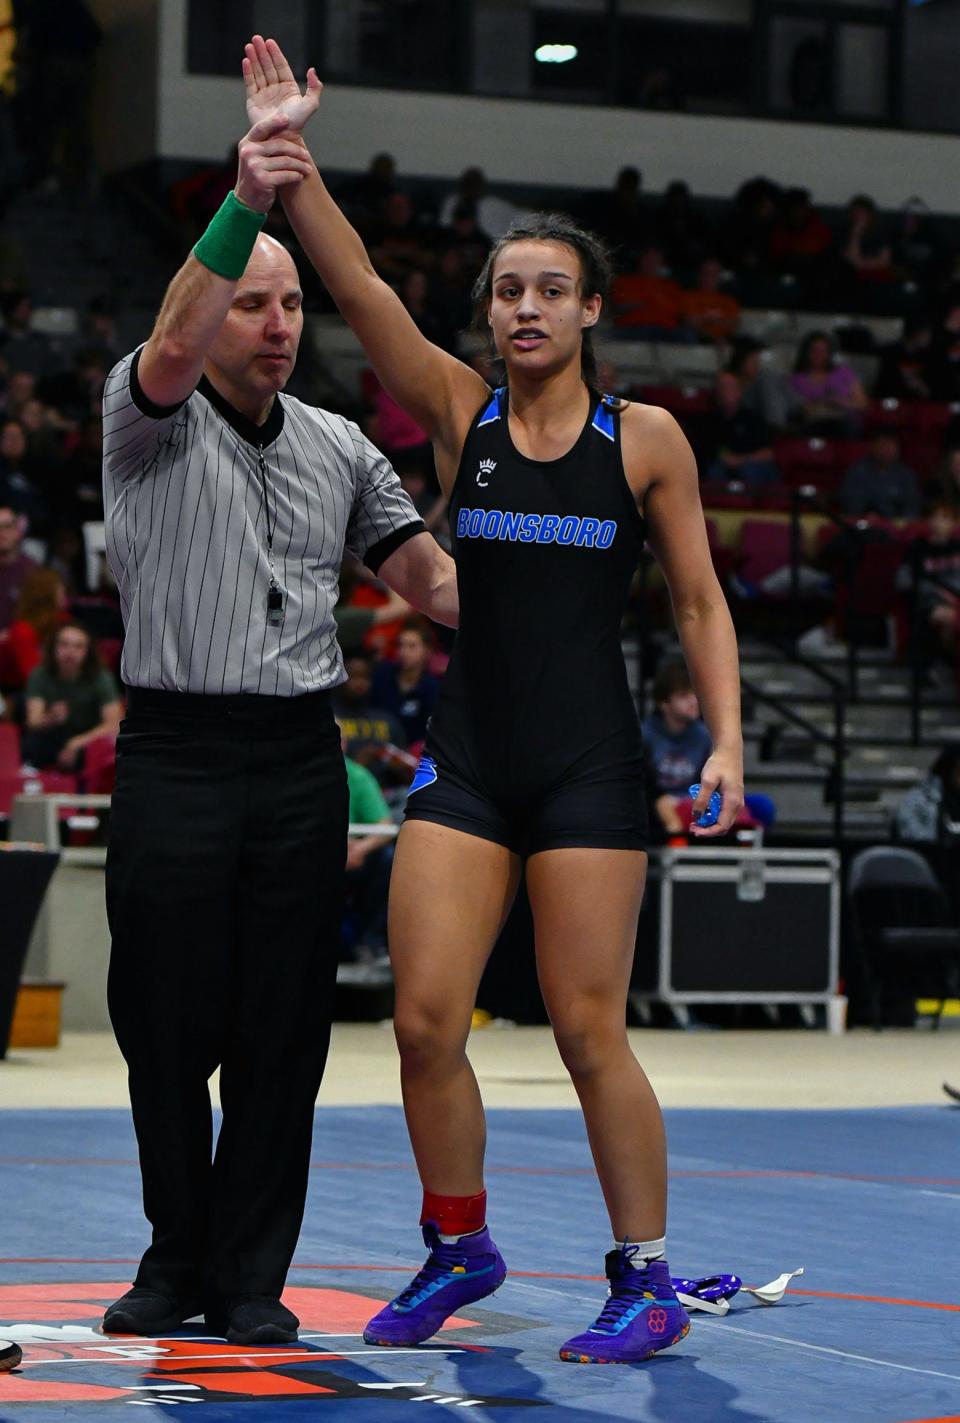 Boonsboro's Amelia Mikus is the Maryland girls state champion at 135 pounds.